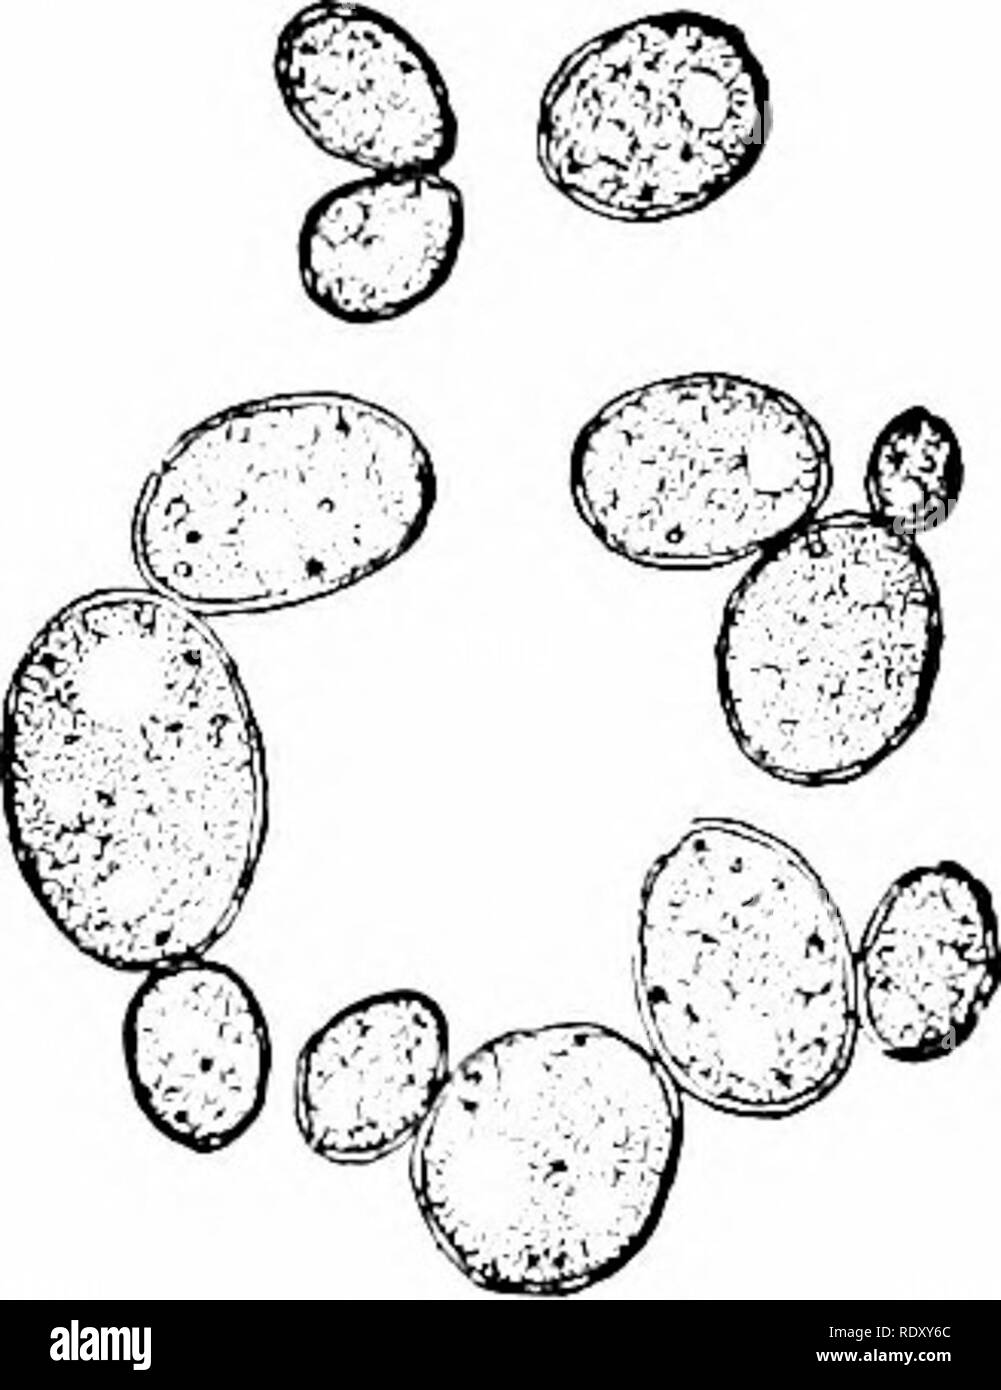 . Principles of modern biology. Biology. 174 - The Cell mycelium displays a syncytial organization; in others it consists of distinct cells, indi- vidually separated by transverse cell walls (Fig. 10-3).. Fig. 10-2. Yeast cells, budding. The light spots are fat droplets and cell-sap vacuoles; the nuclei are not visi- ble in living, unstained cells. SAPROPHYTIC NUTRITION The saprophytic mode of nutrition is dis- played by most of the yeasts, molds, and bacteria. Saprophytic organisms, like ani- mals, require at least a minimum of pre- formed organic food; but lacking a digestive cavity, saproph Stock Photo